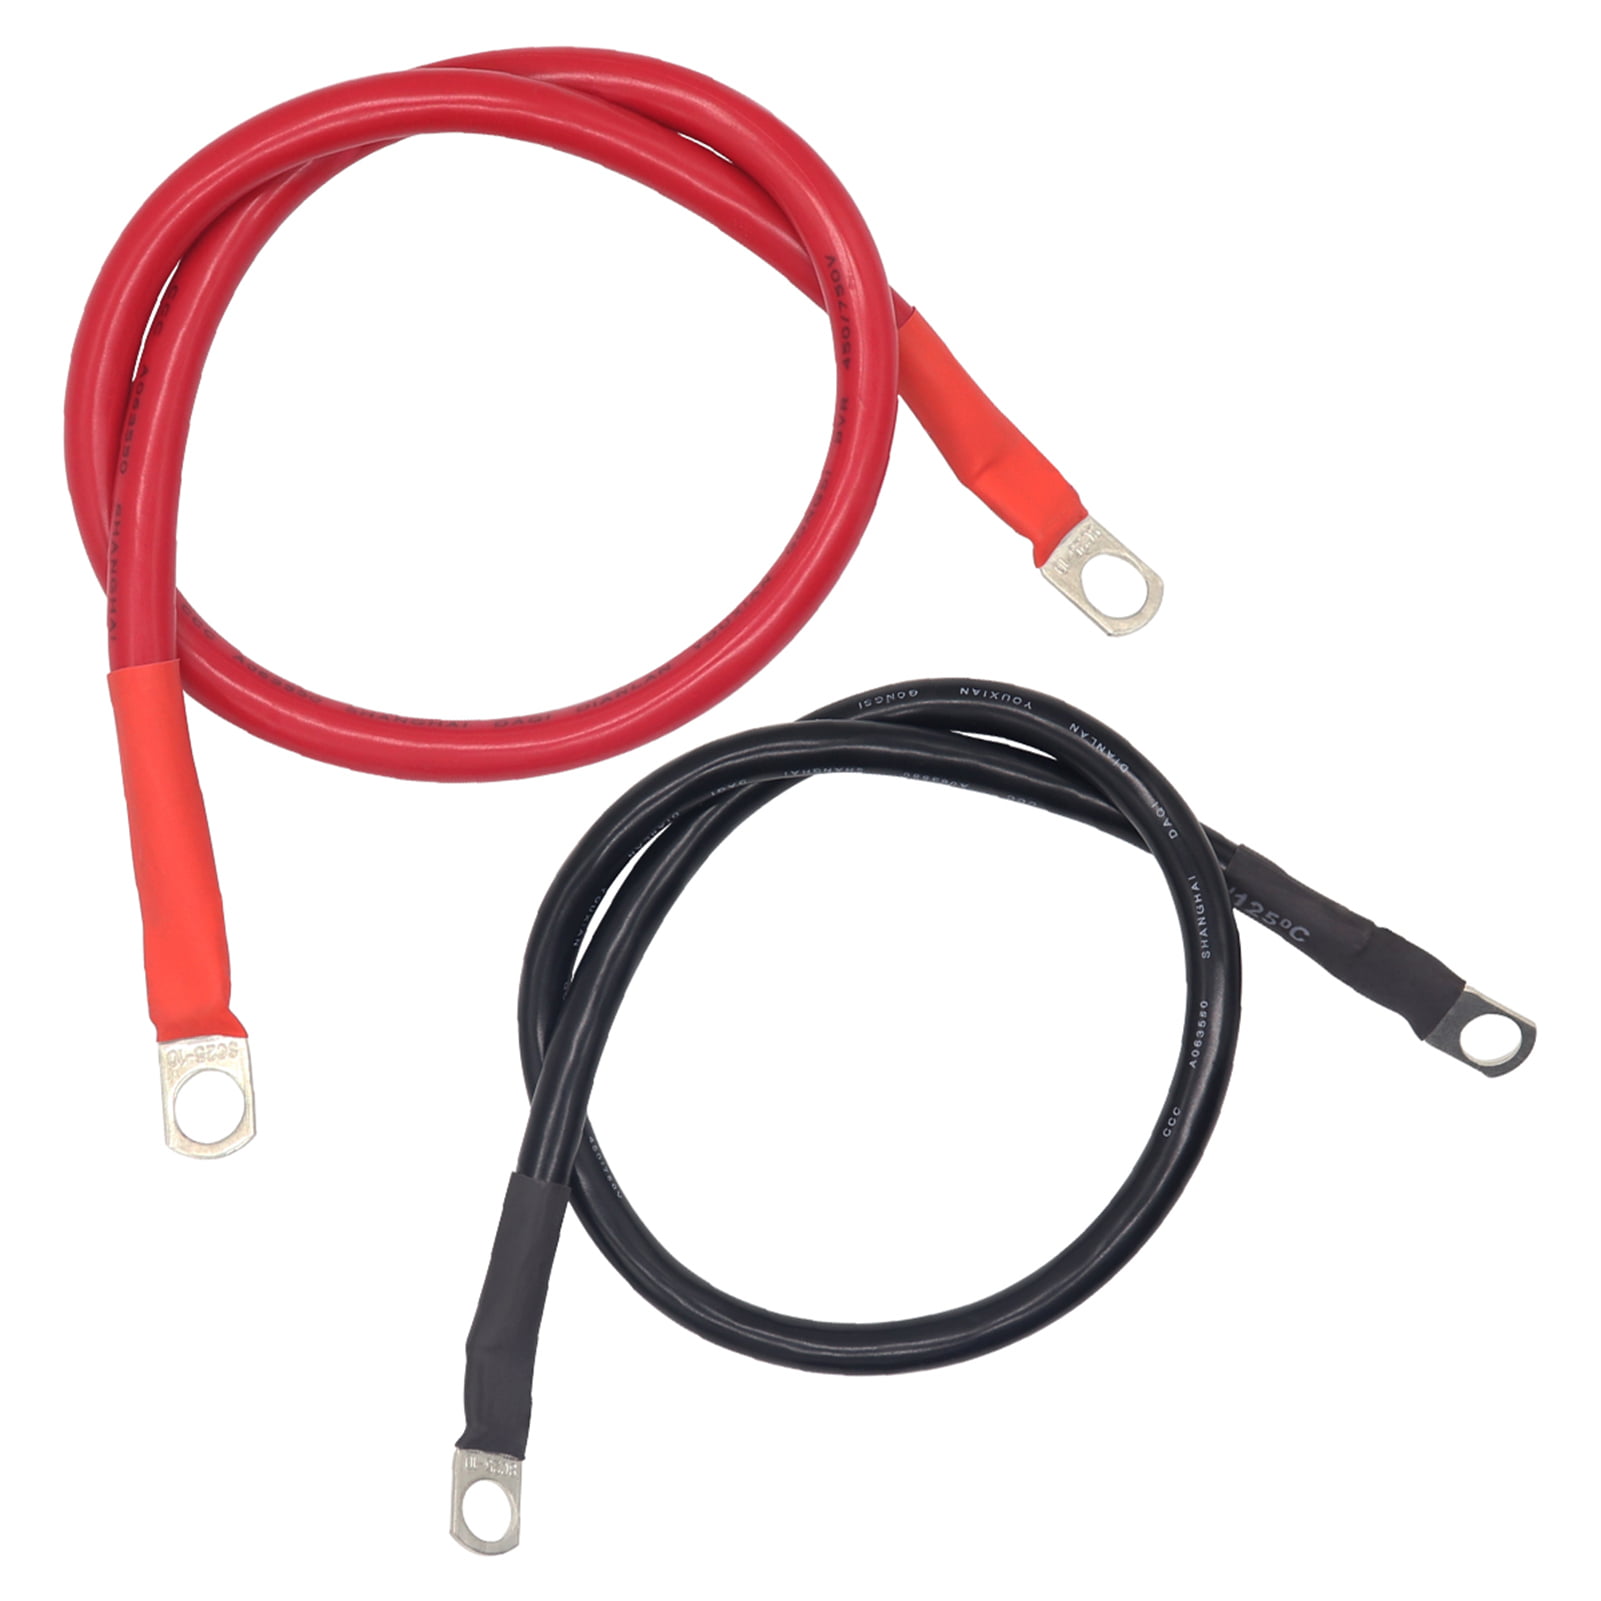 BATTERY STARTER CABLE LEAD STRAP EARTHING POINT NEGATIVE CAR MOTOR BOAT MARINE 